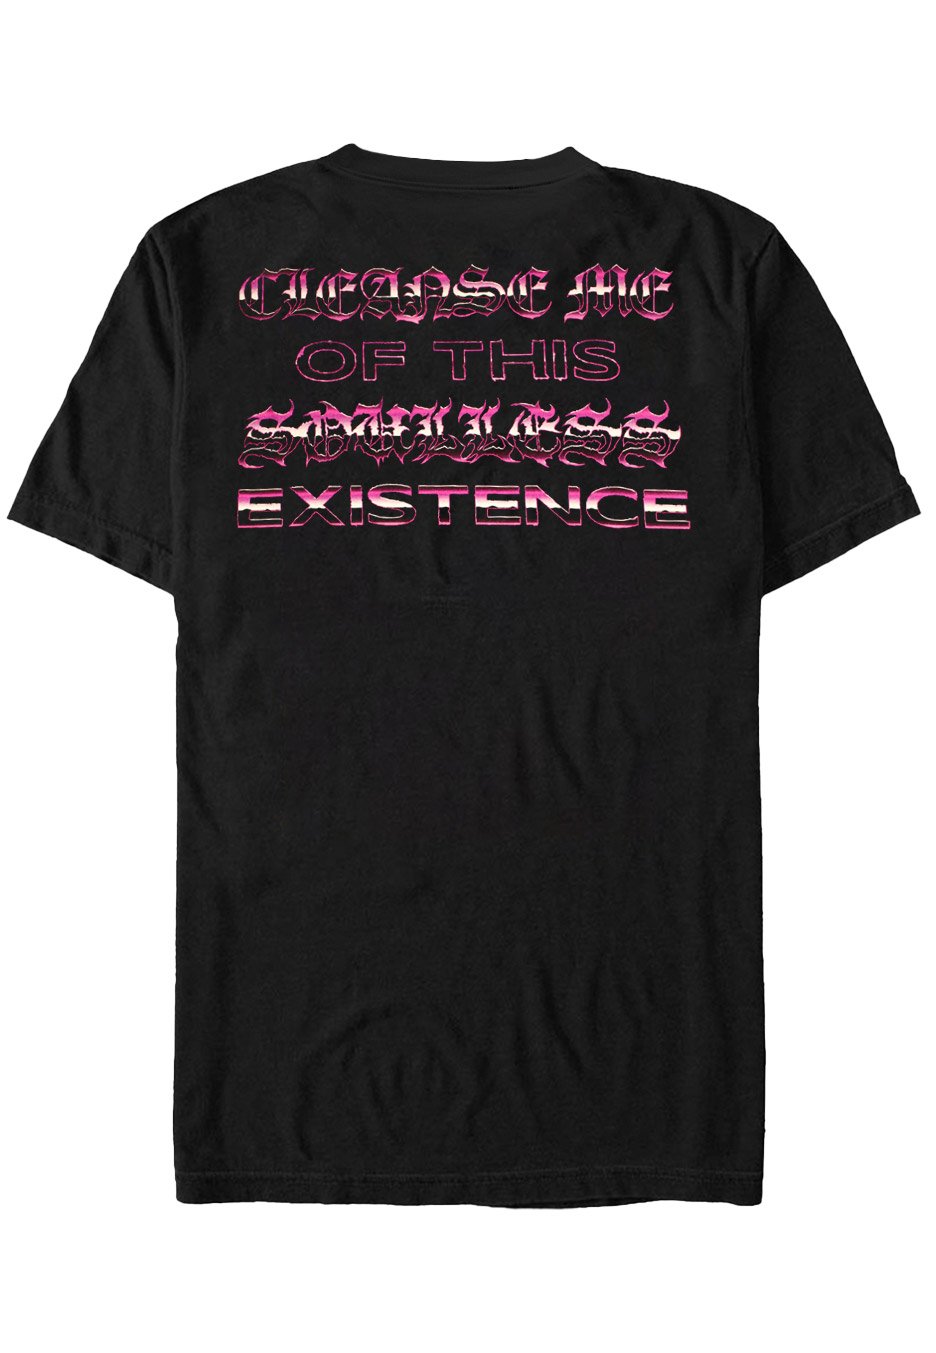 Lorna Shore - Soulless Existence - T-Shirt | Neutral-Image